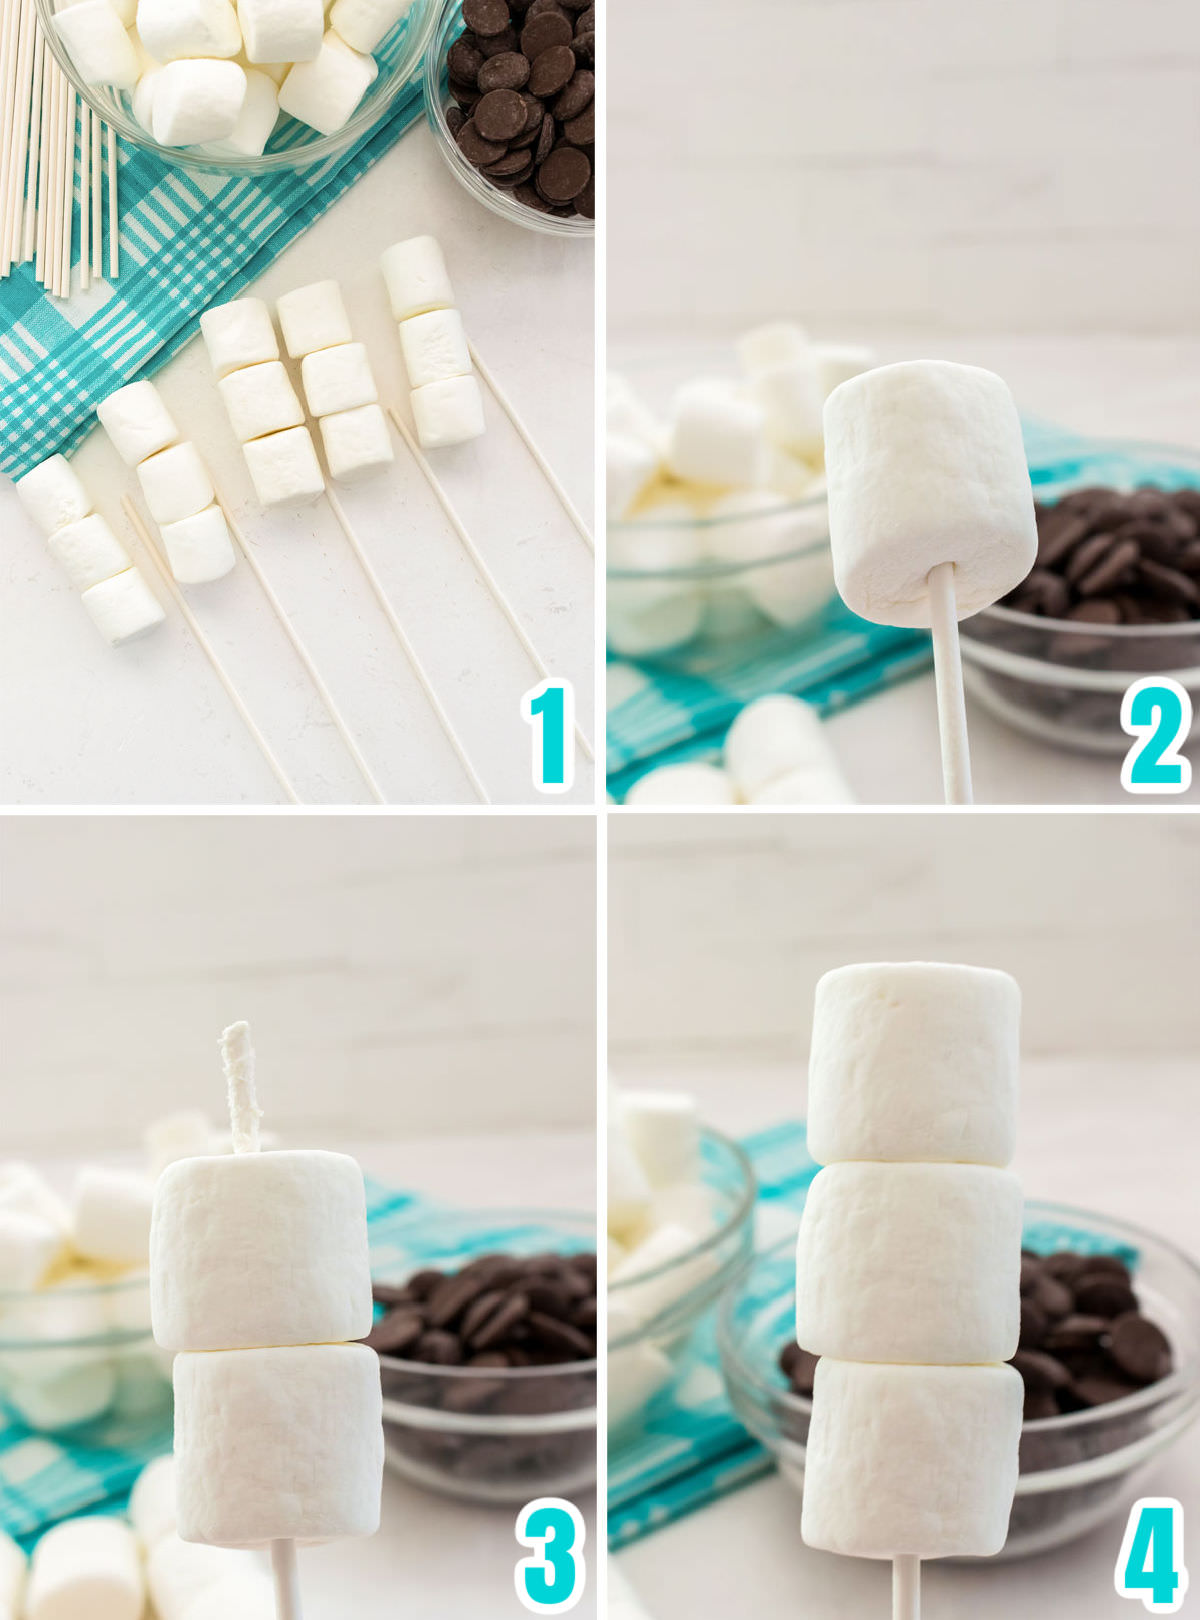 Collage image showing how to place the marshmallows on the lollipop stick.